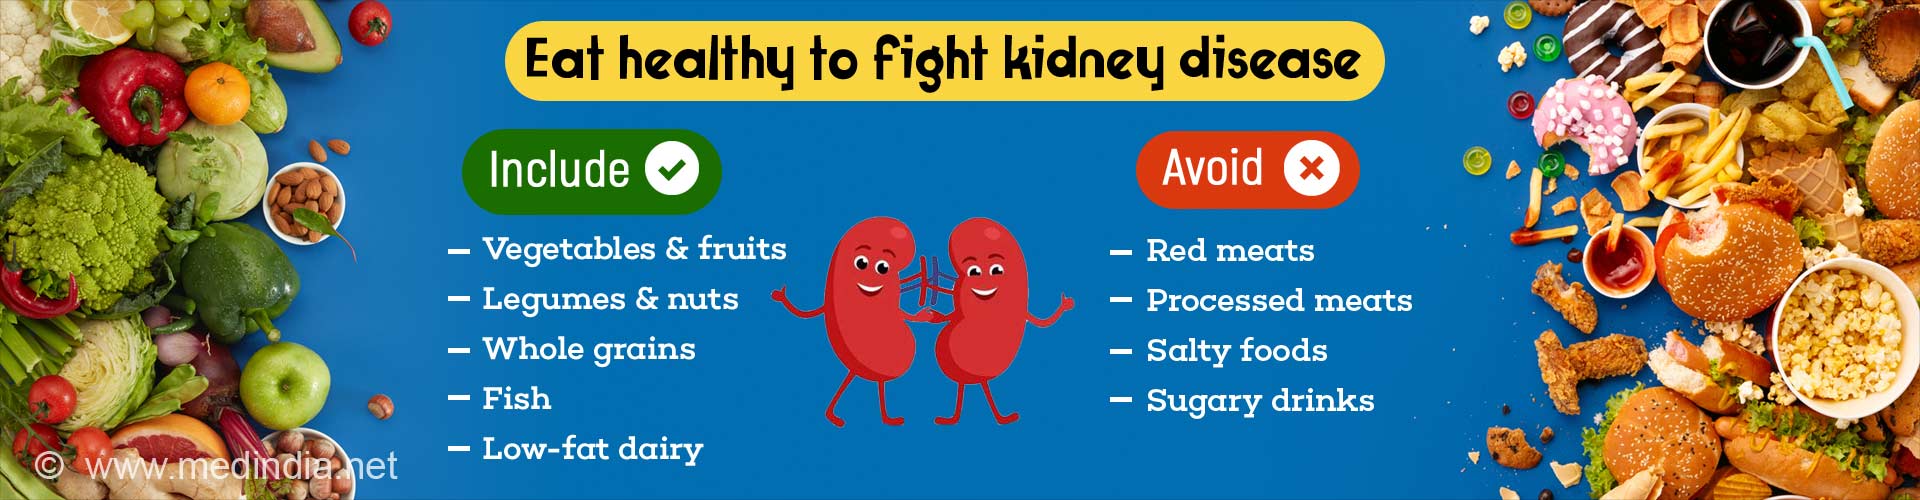 Eat healthy to fight kidney disease. Include: Vegetables and fruit, legumes and nuts, whole grains, fish, and low-fat dairy products. Avoid: Red meats, processed meats, salty foods and sugary drinks.